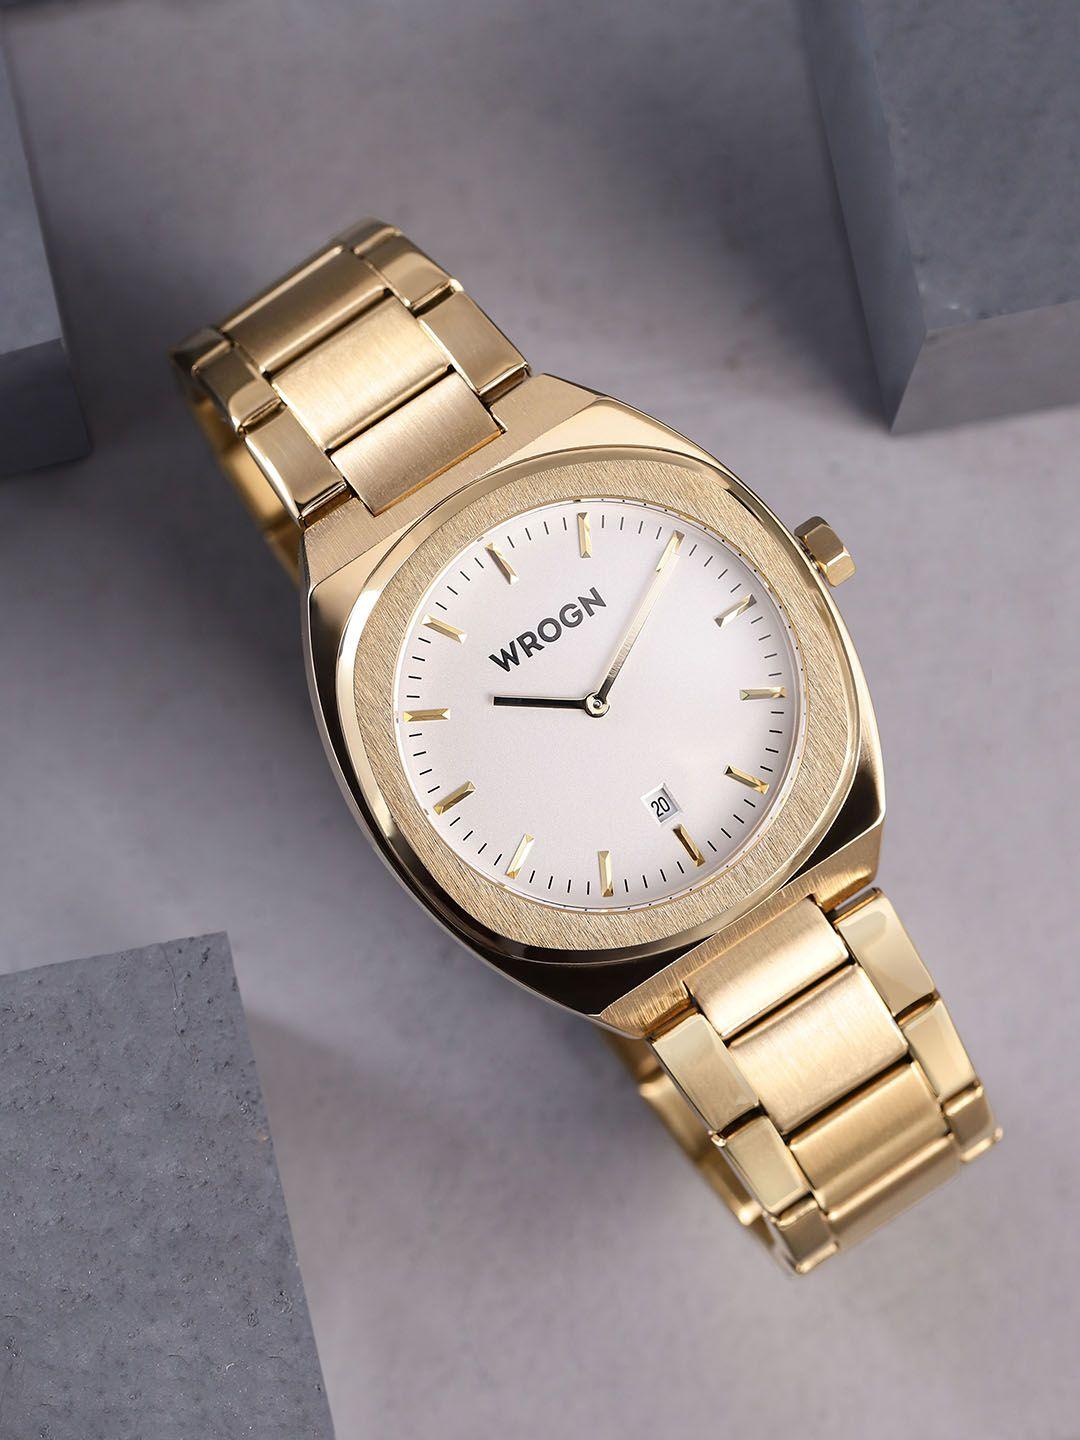 wrogn-men-silver-toned-dial-&-gold-toned-bracelet-style-analogue-watch-mfb-pn-mf0319g